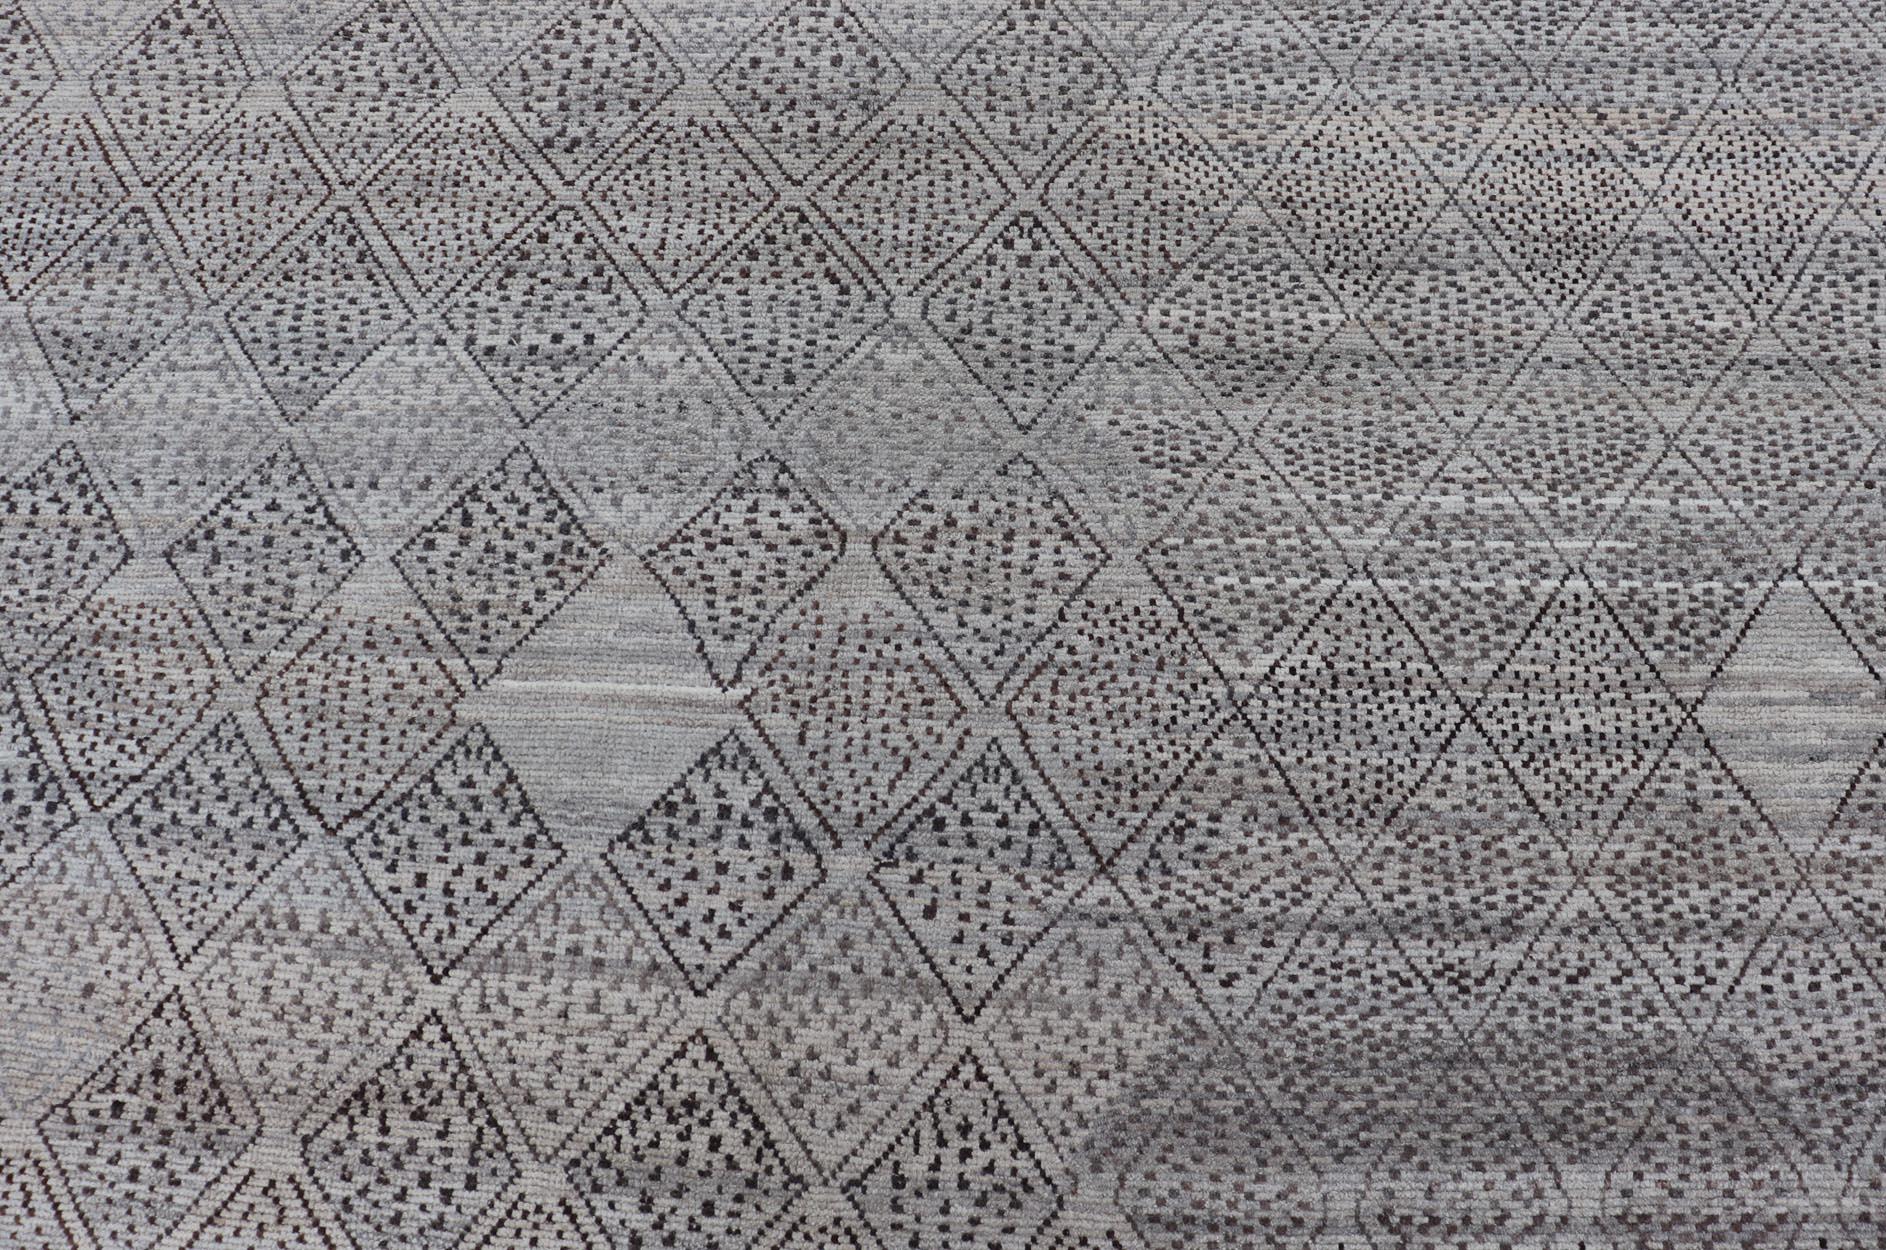 Very Large Modern Rug with Diamond Design in Gray, Taupe & Earth Tones For Sale 2